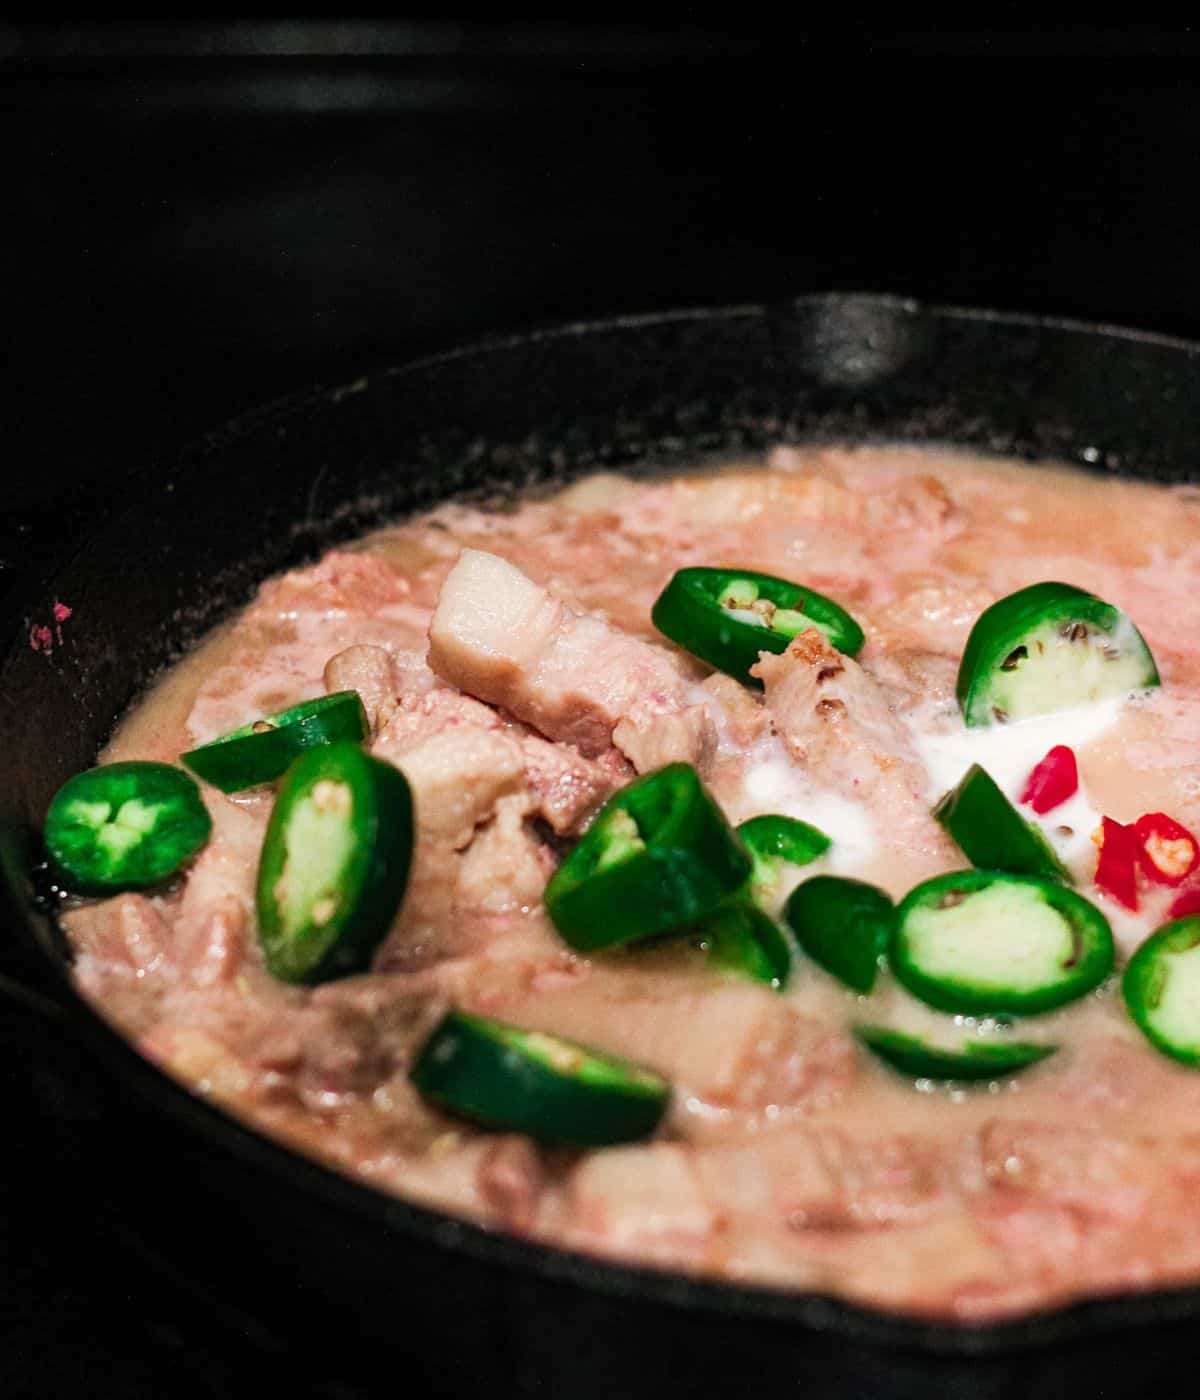 Adding green and red chillies.